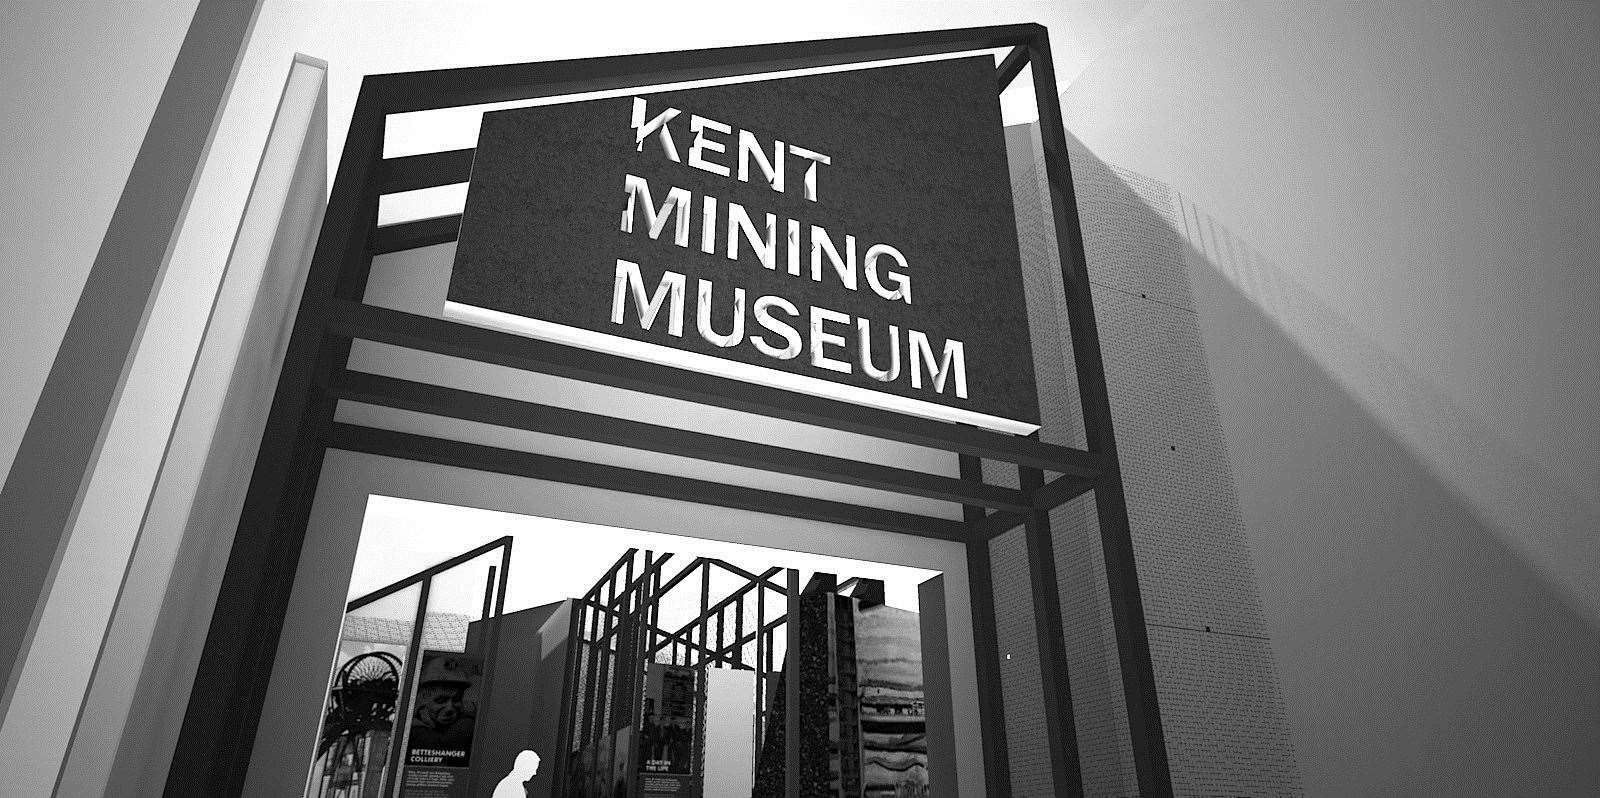 Kent Mining Museum will open in Spring 2022